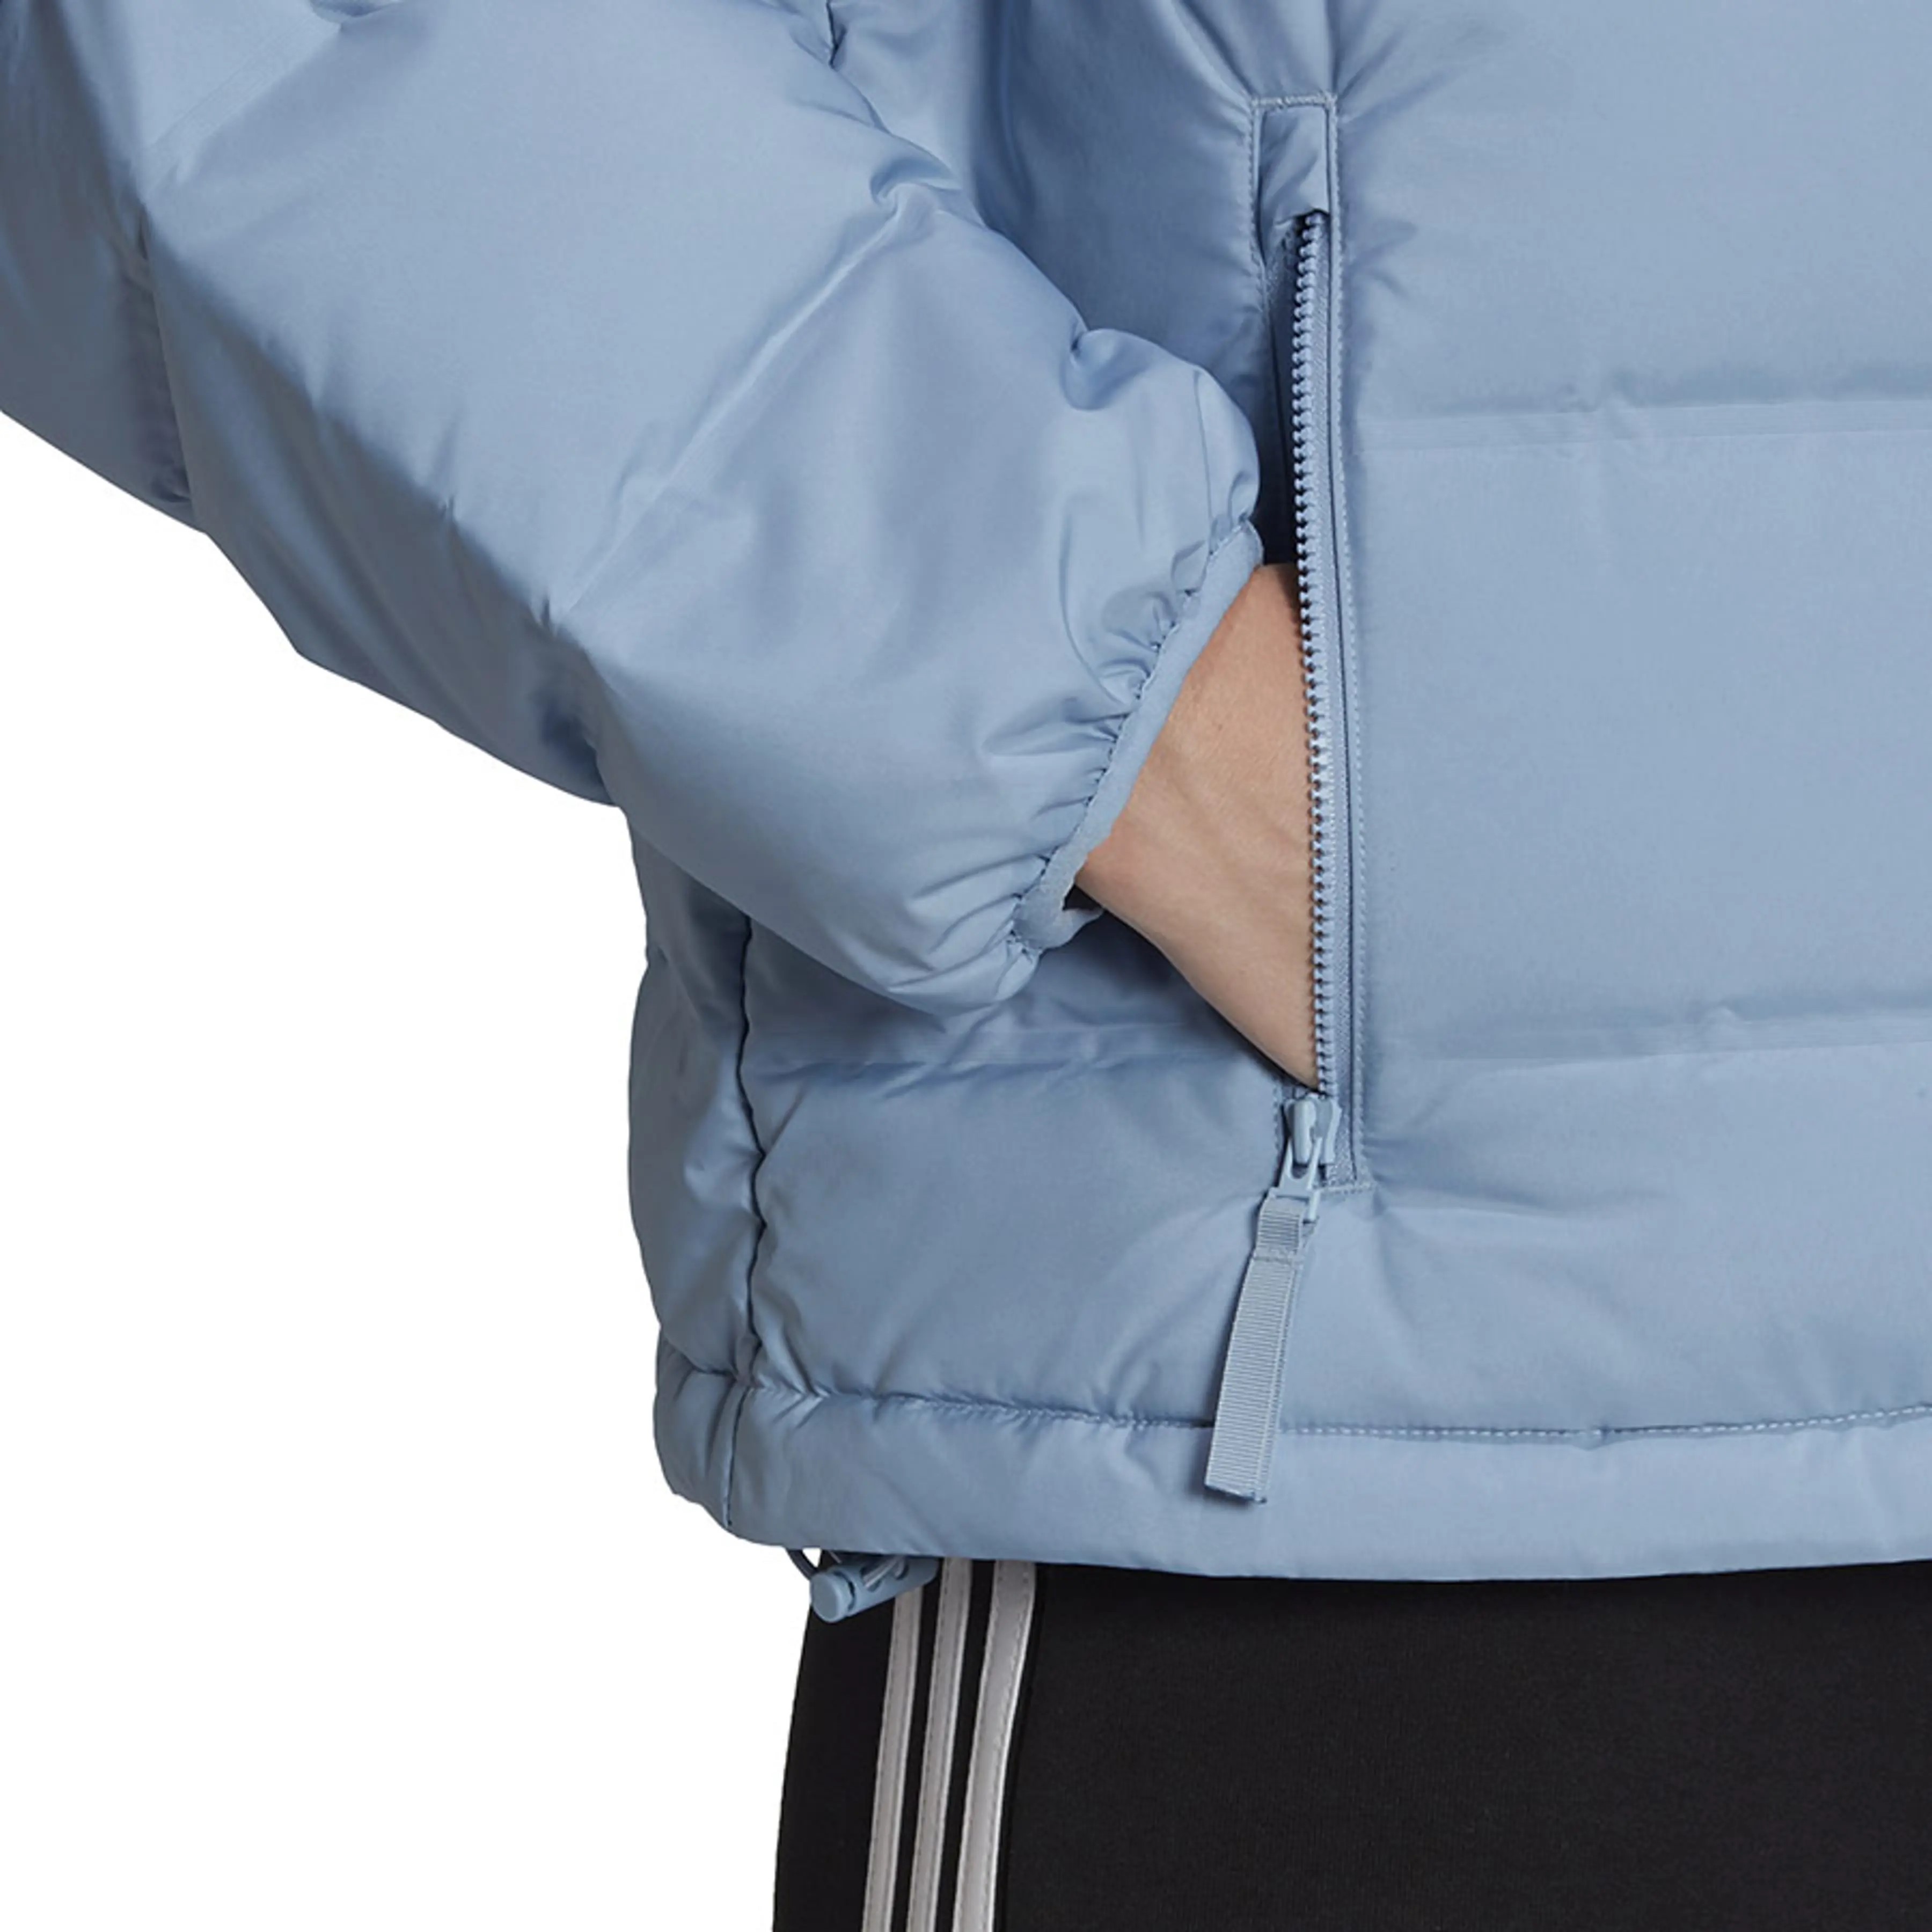 Adidas Women\'s Helionic Relaxed Fit Puffer Down Jacket, Ambient Sky | eBay